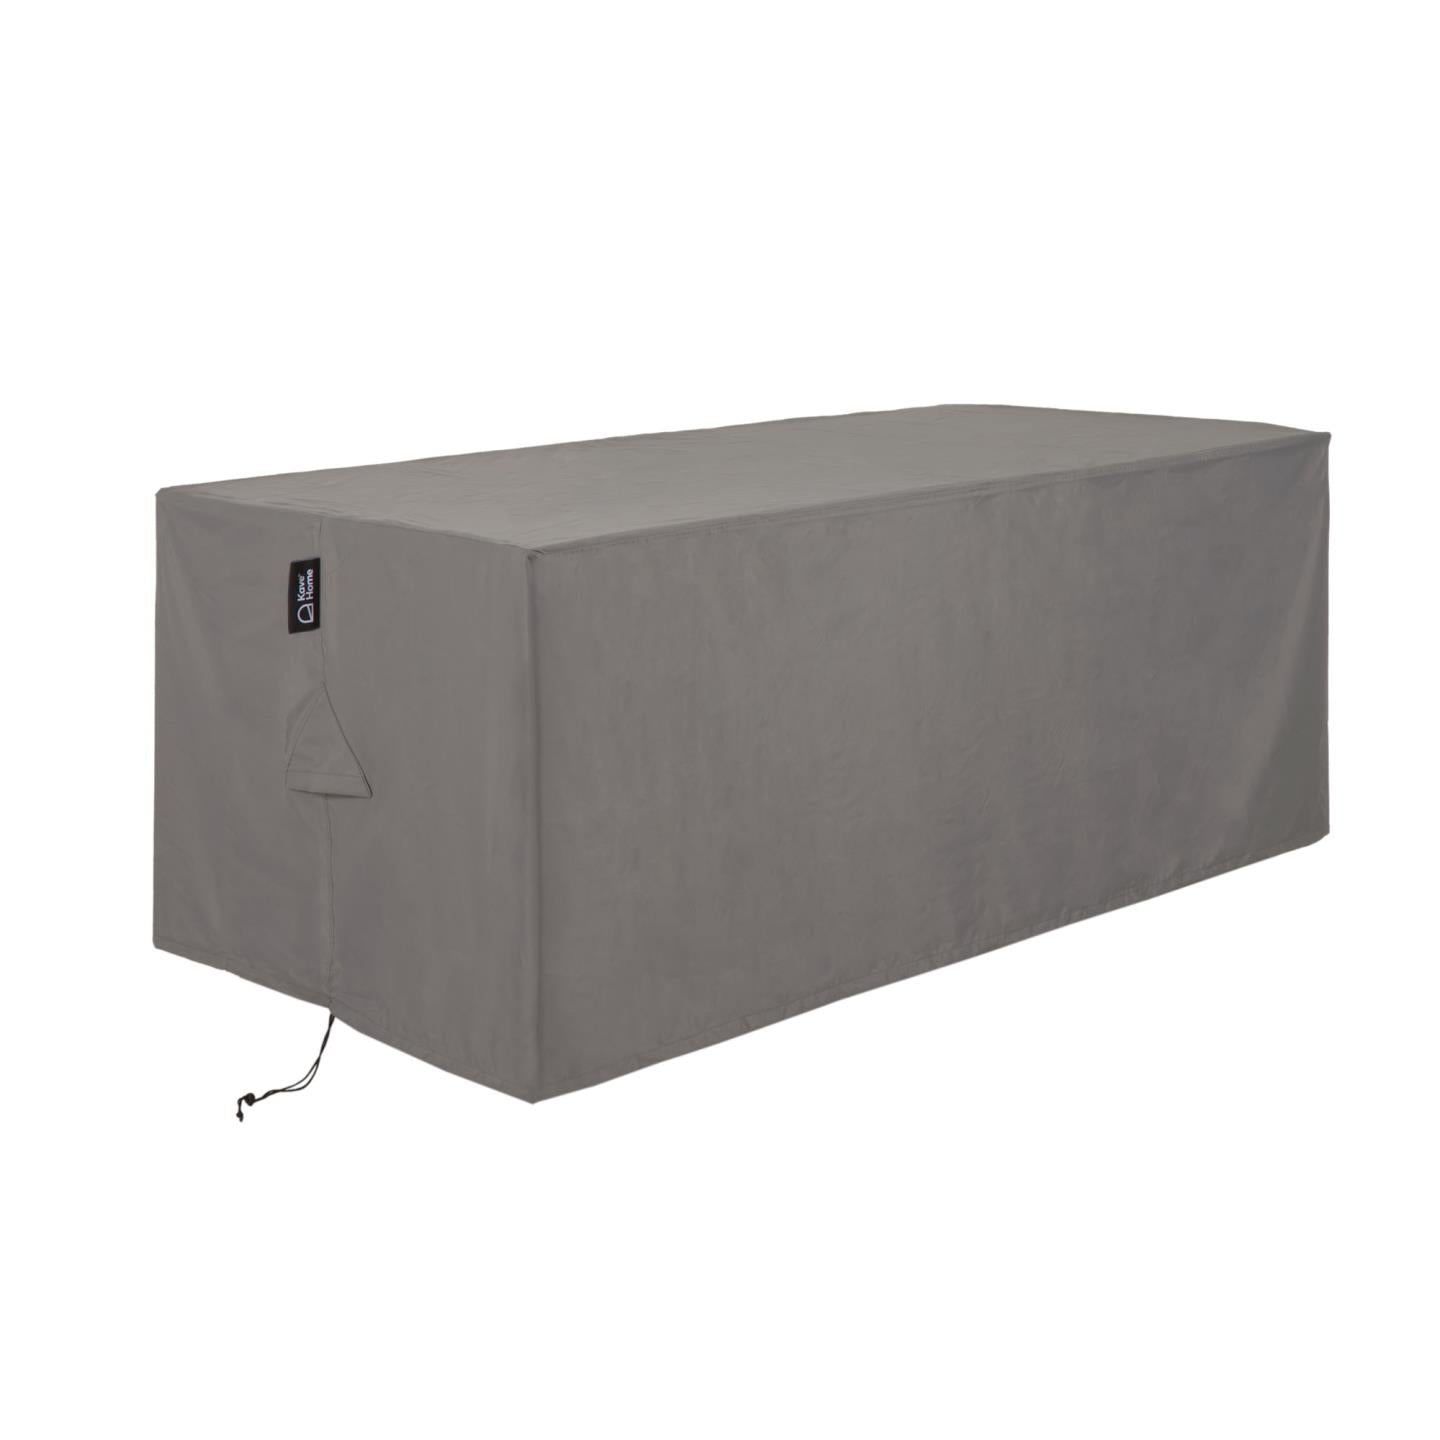 Iria protective cover for large outdoor rectangular tables max. 210 x 110 cm